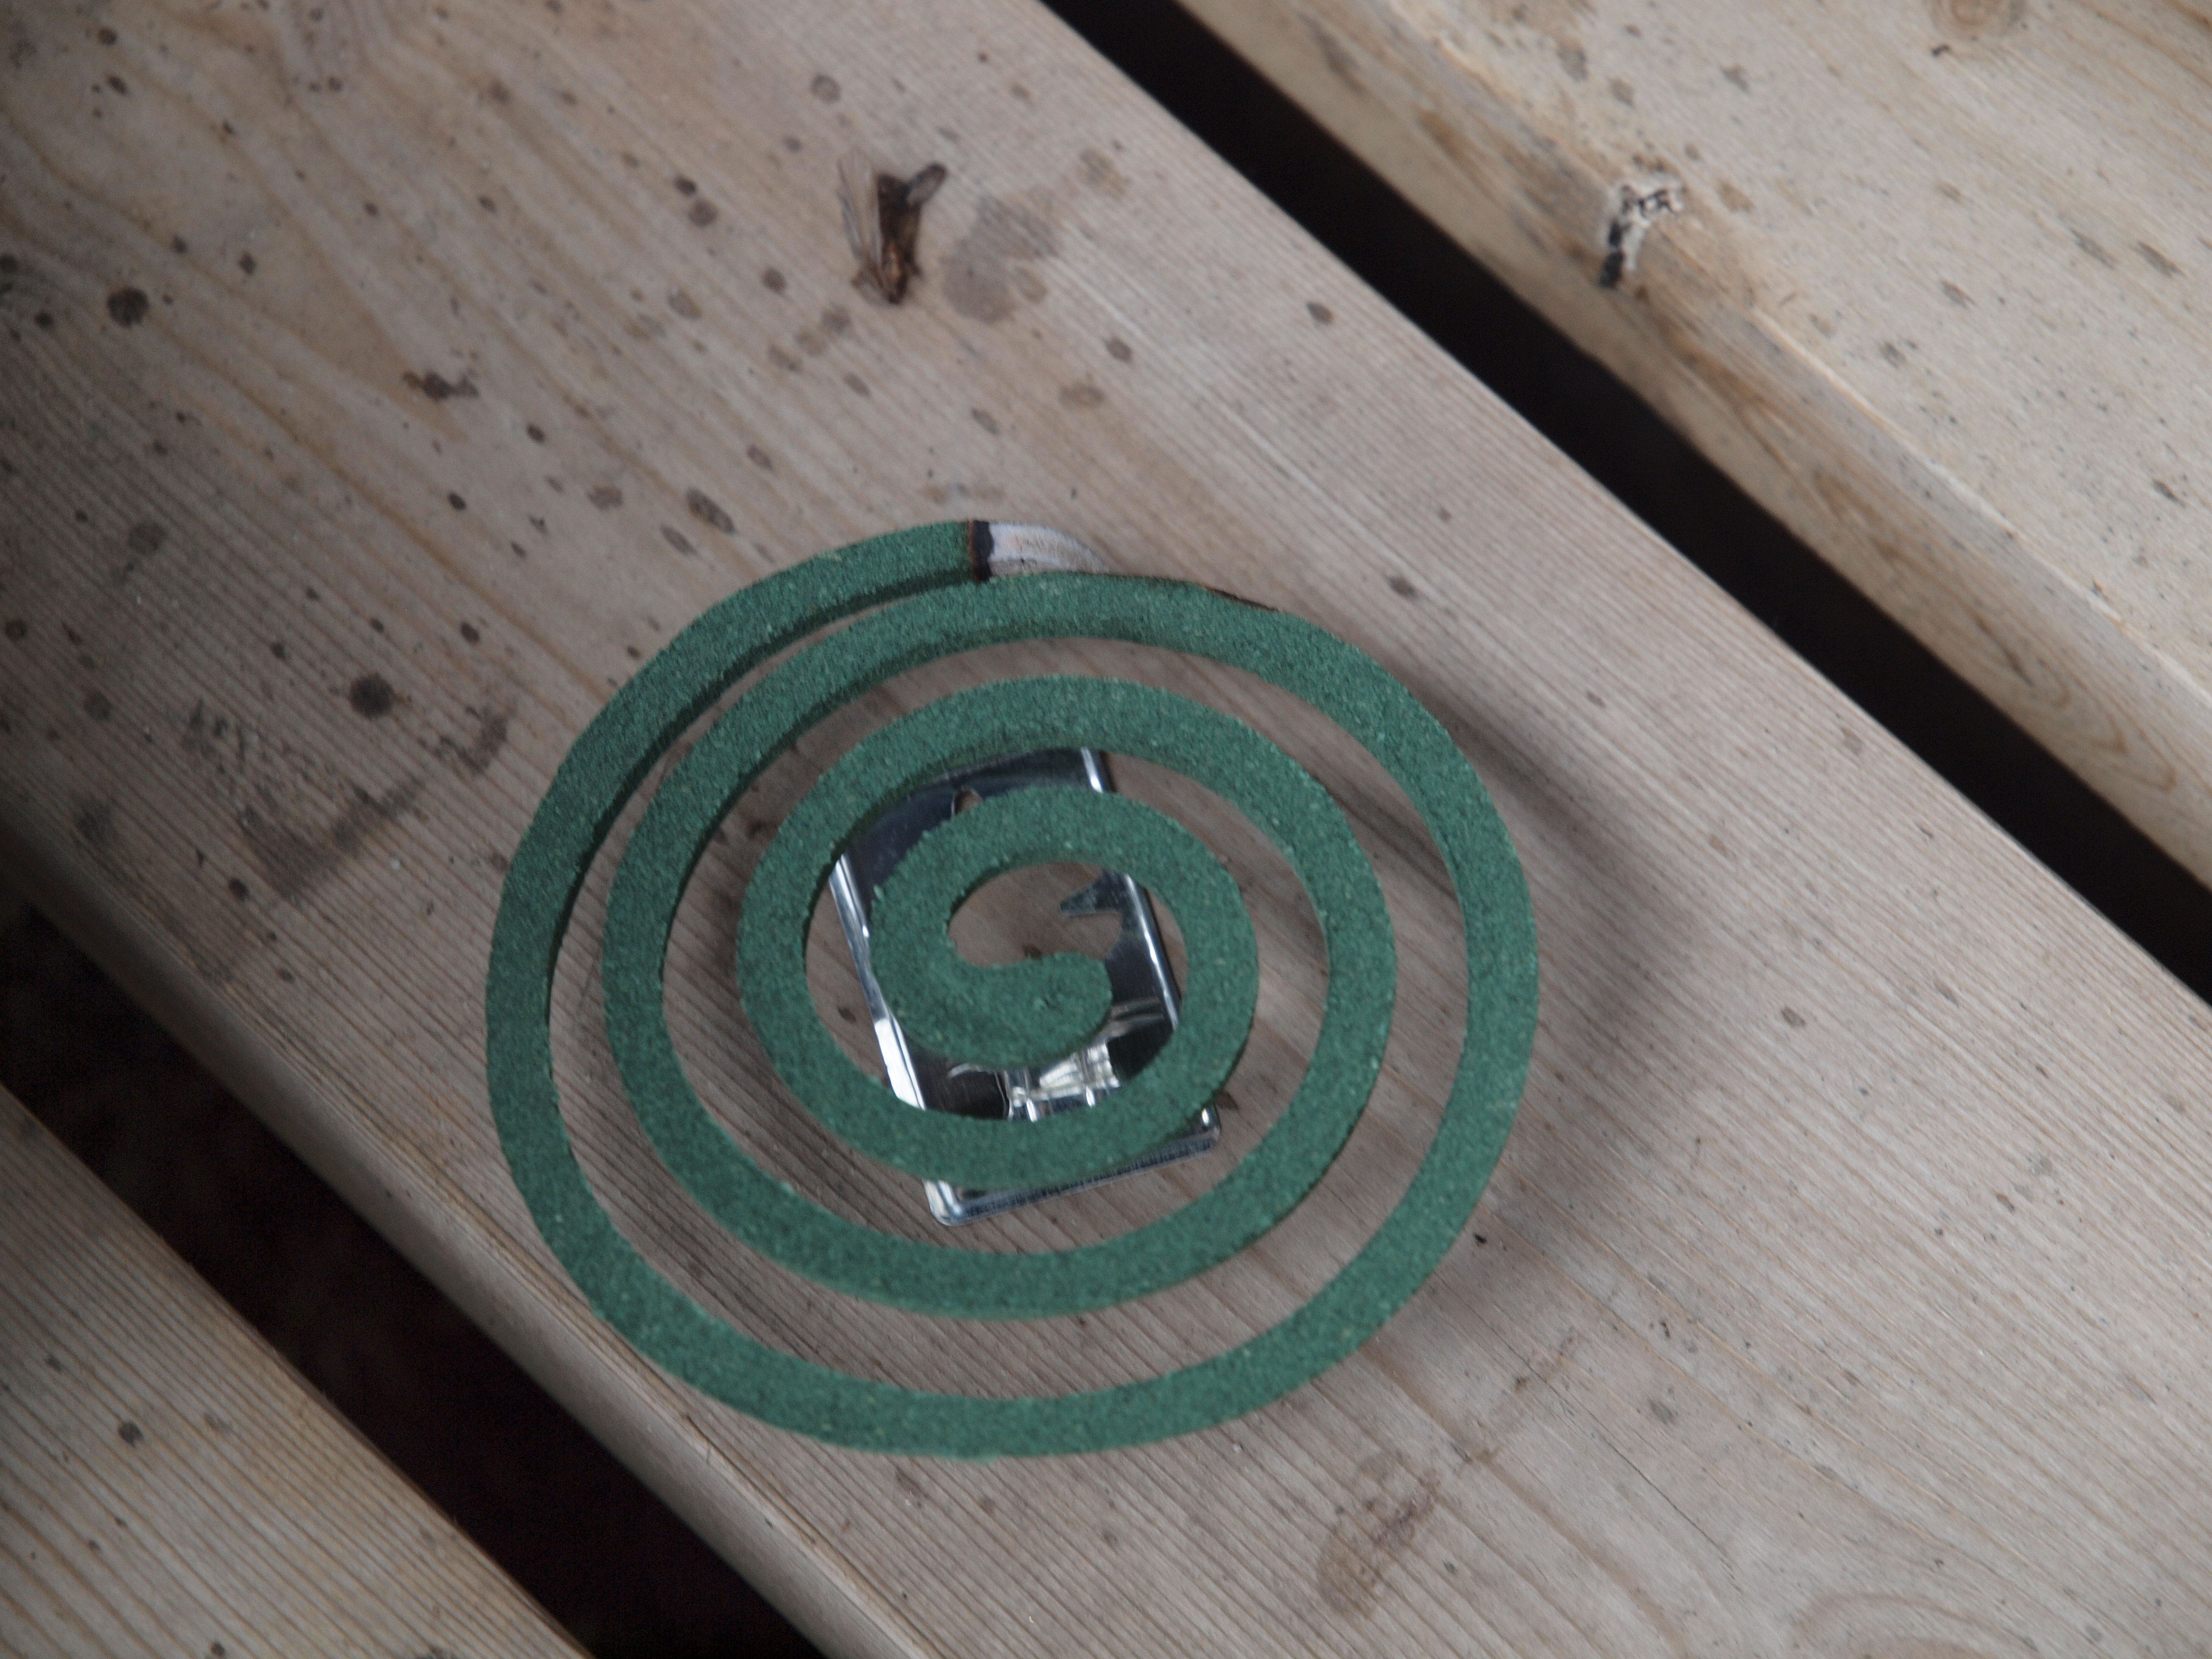 The school claims that the fire originated from a mosquito coil. Photo: WikiCommons / JIP